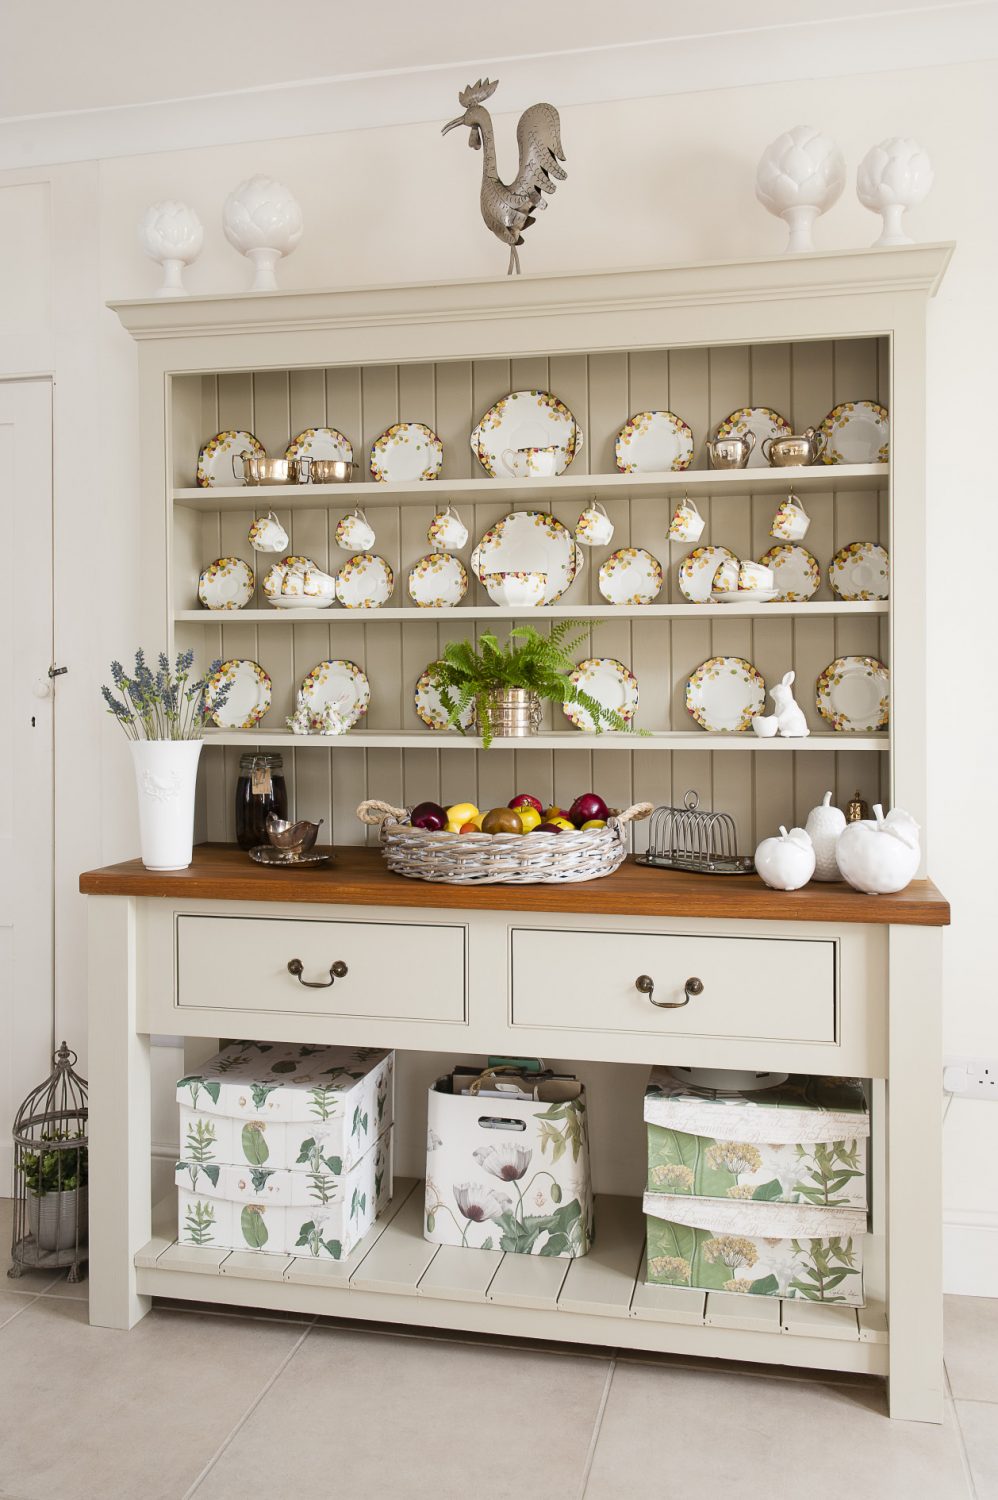 A painted Welsh dresser displays a full set of early 20th century bone china that belonged to Murielle’s parents